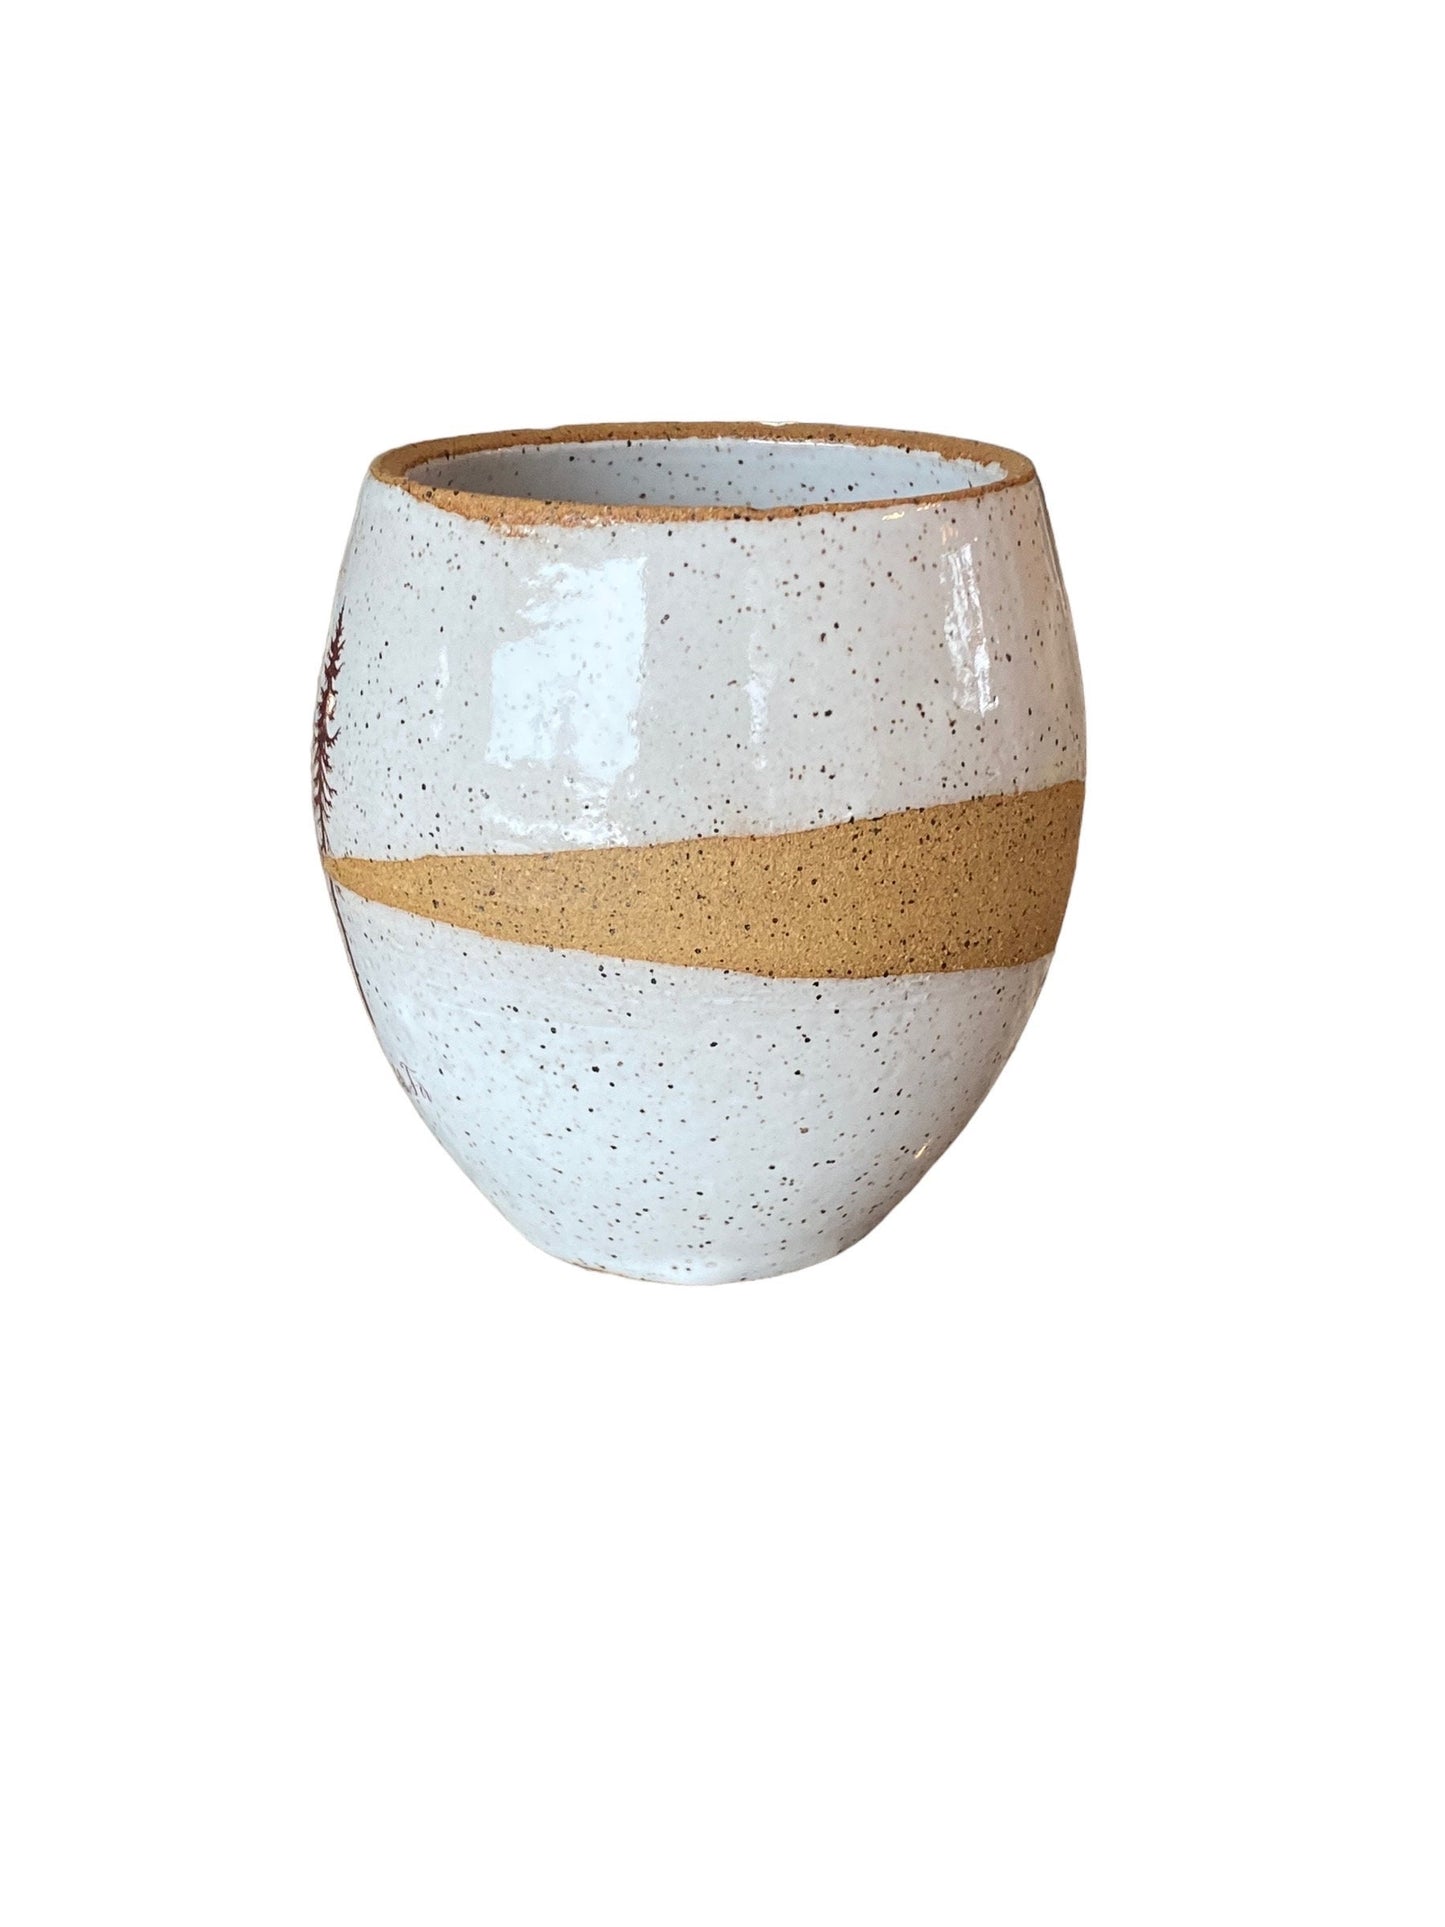 Chic White Speckled Handlesss 16-Ounce Stoneware Pottery Mug with Douglass FirTree Art - Unique and Stylish Handcrafted Drinkware